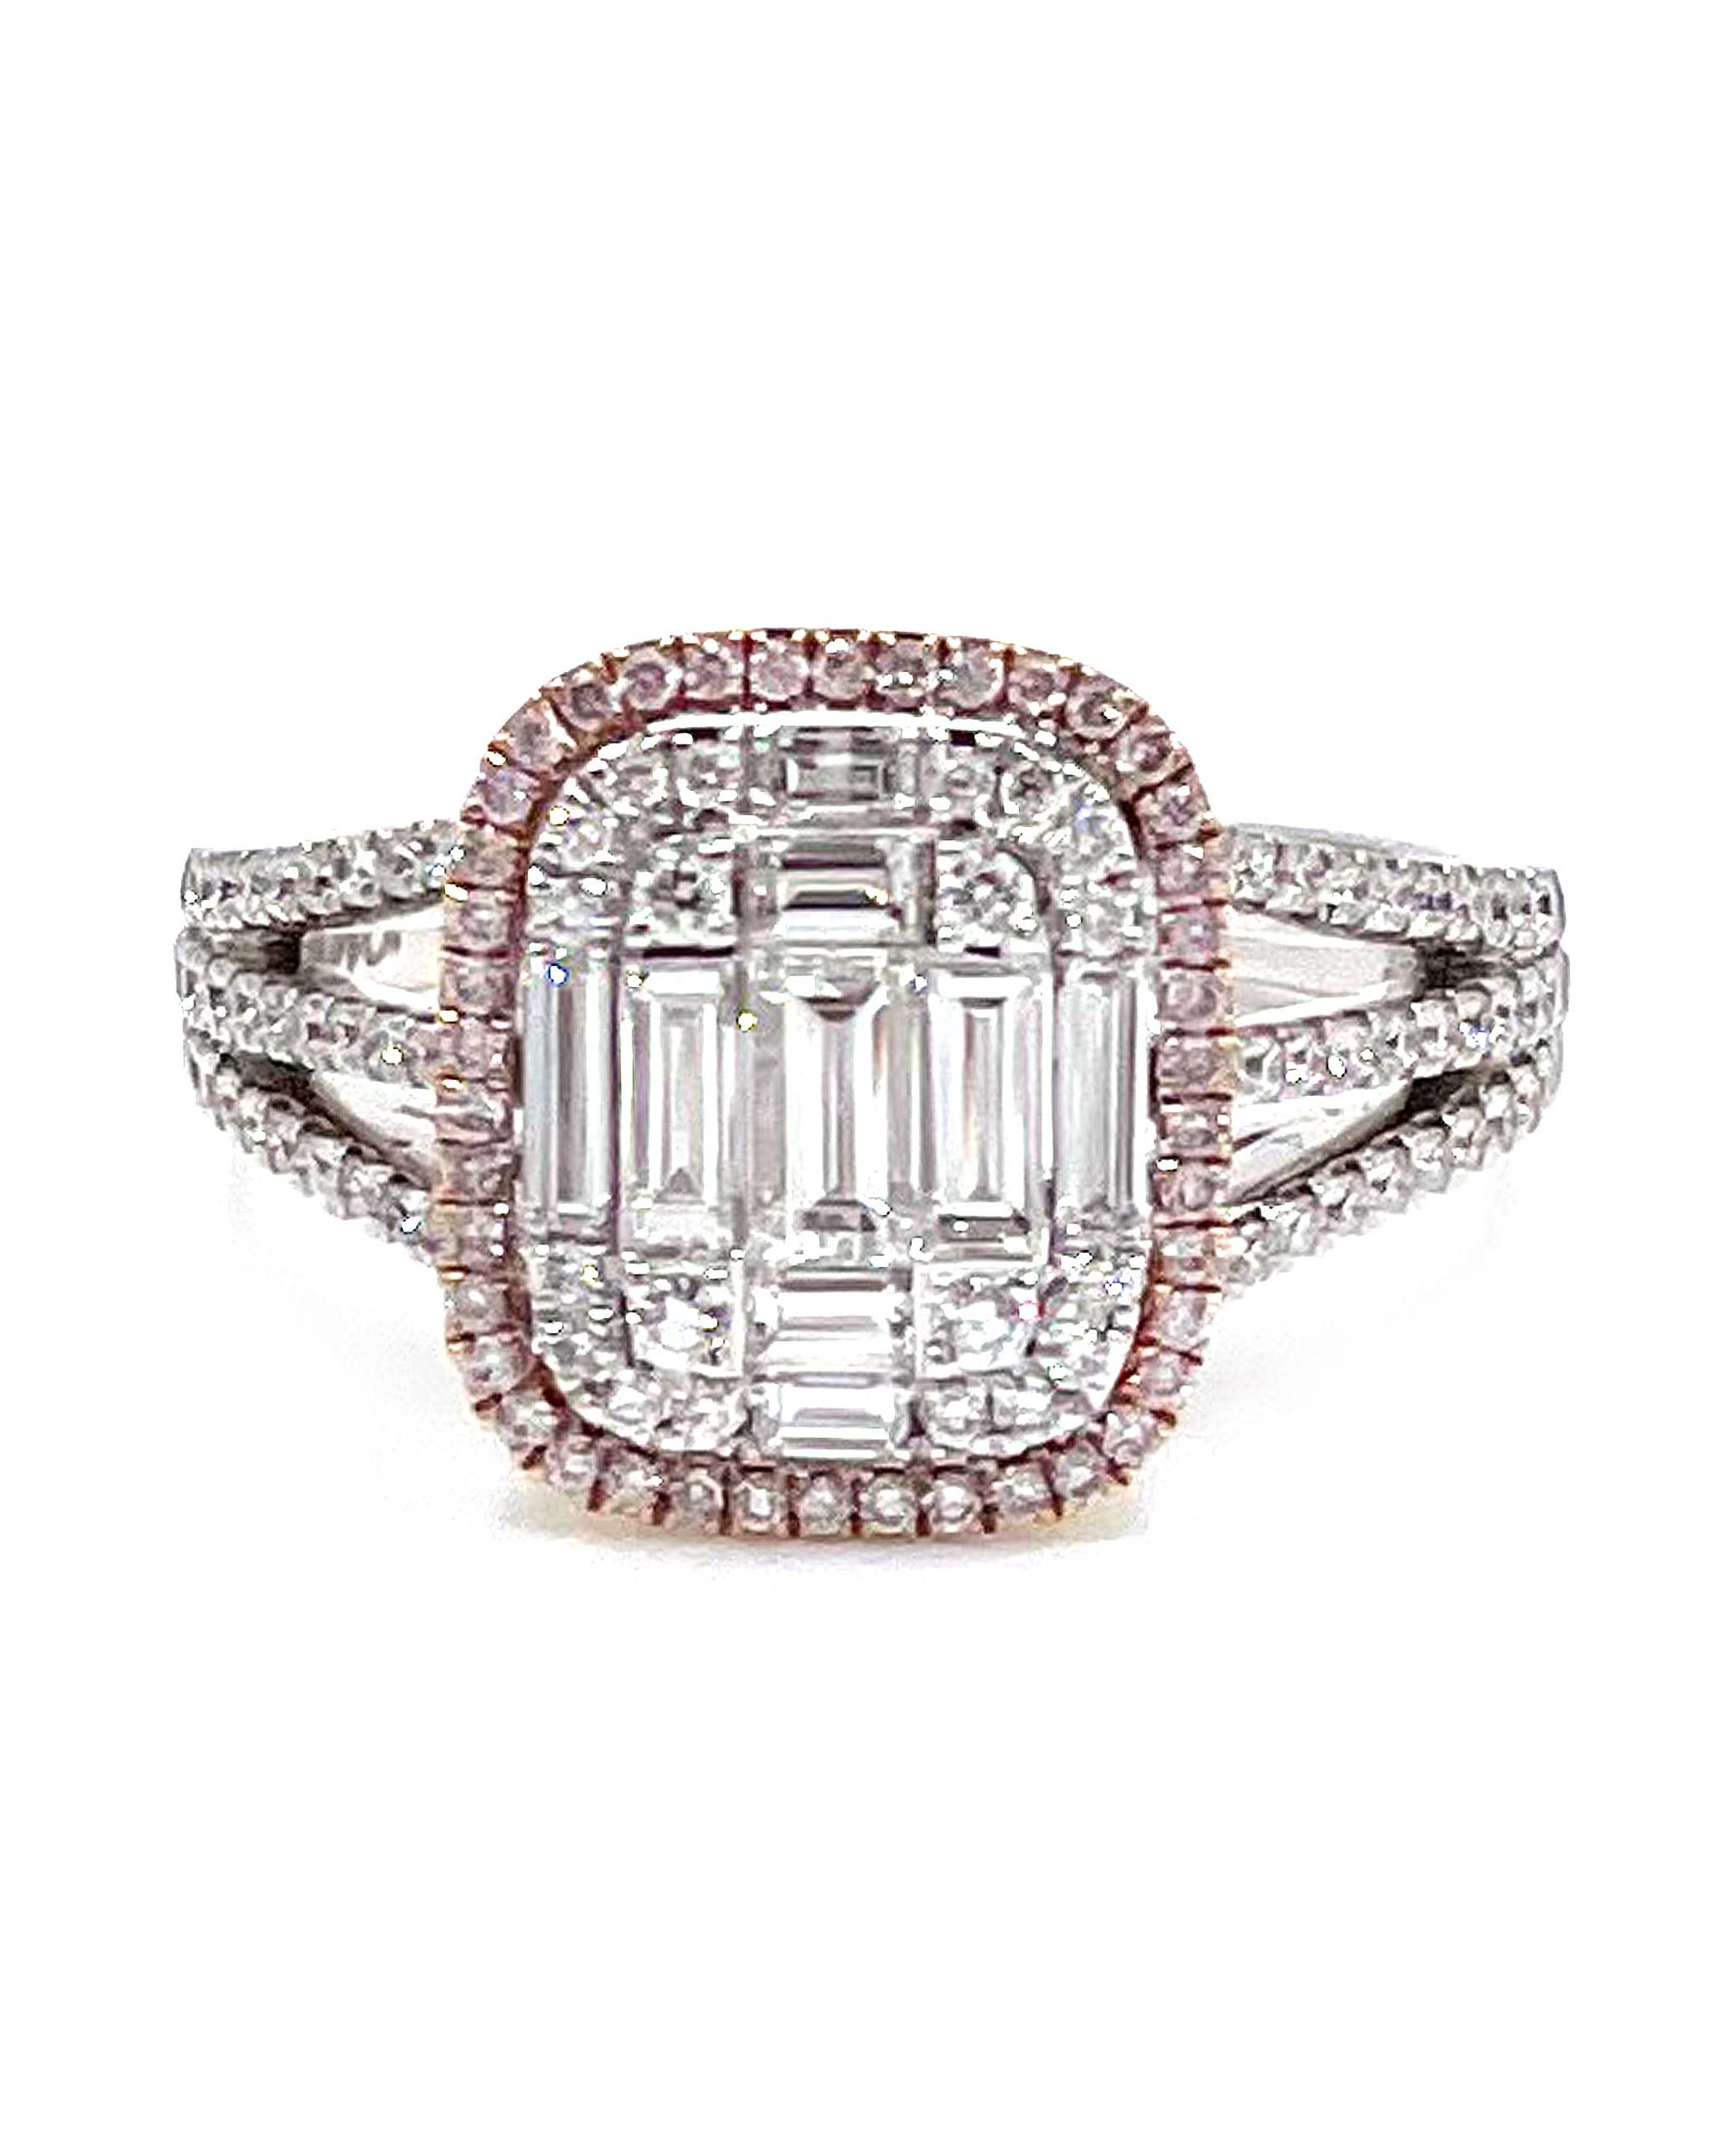 Simon G. MR2627 18K white and rose gold ring from the 